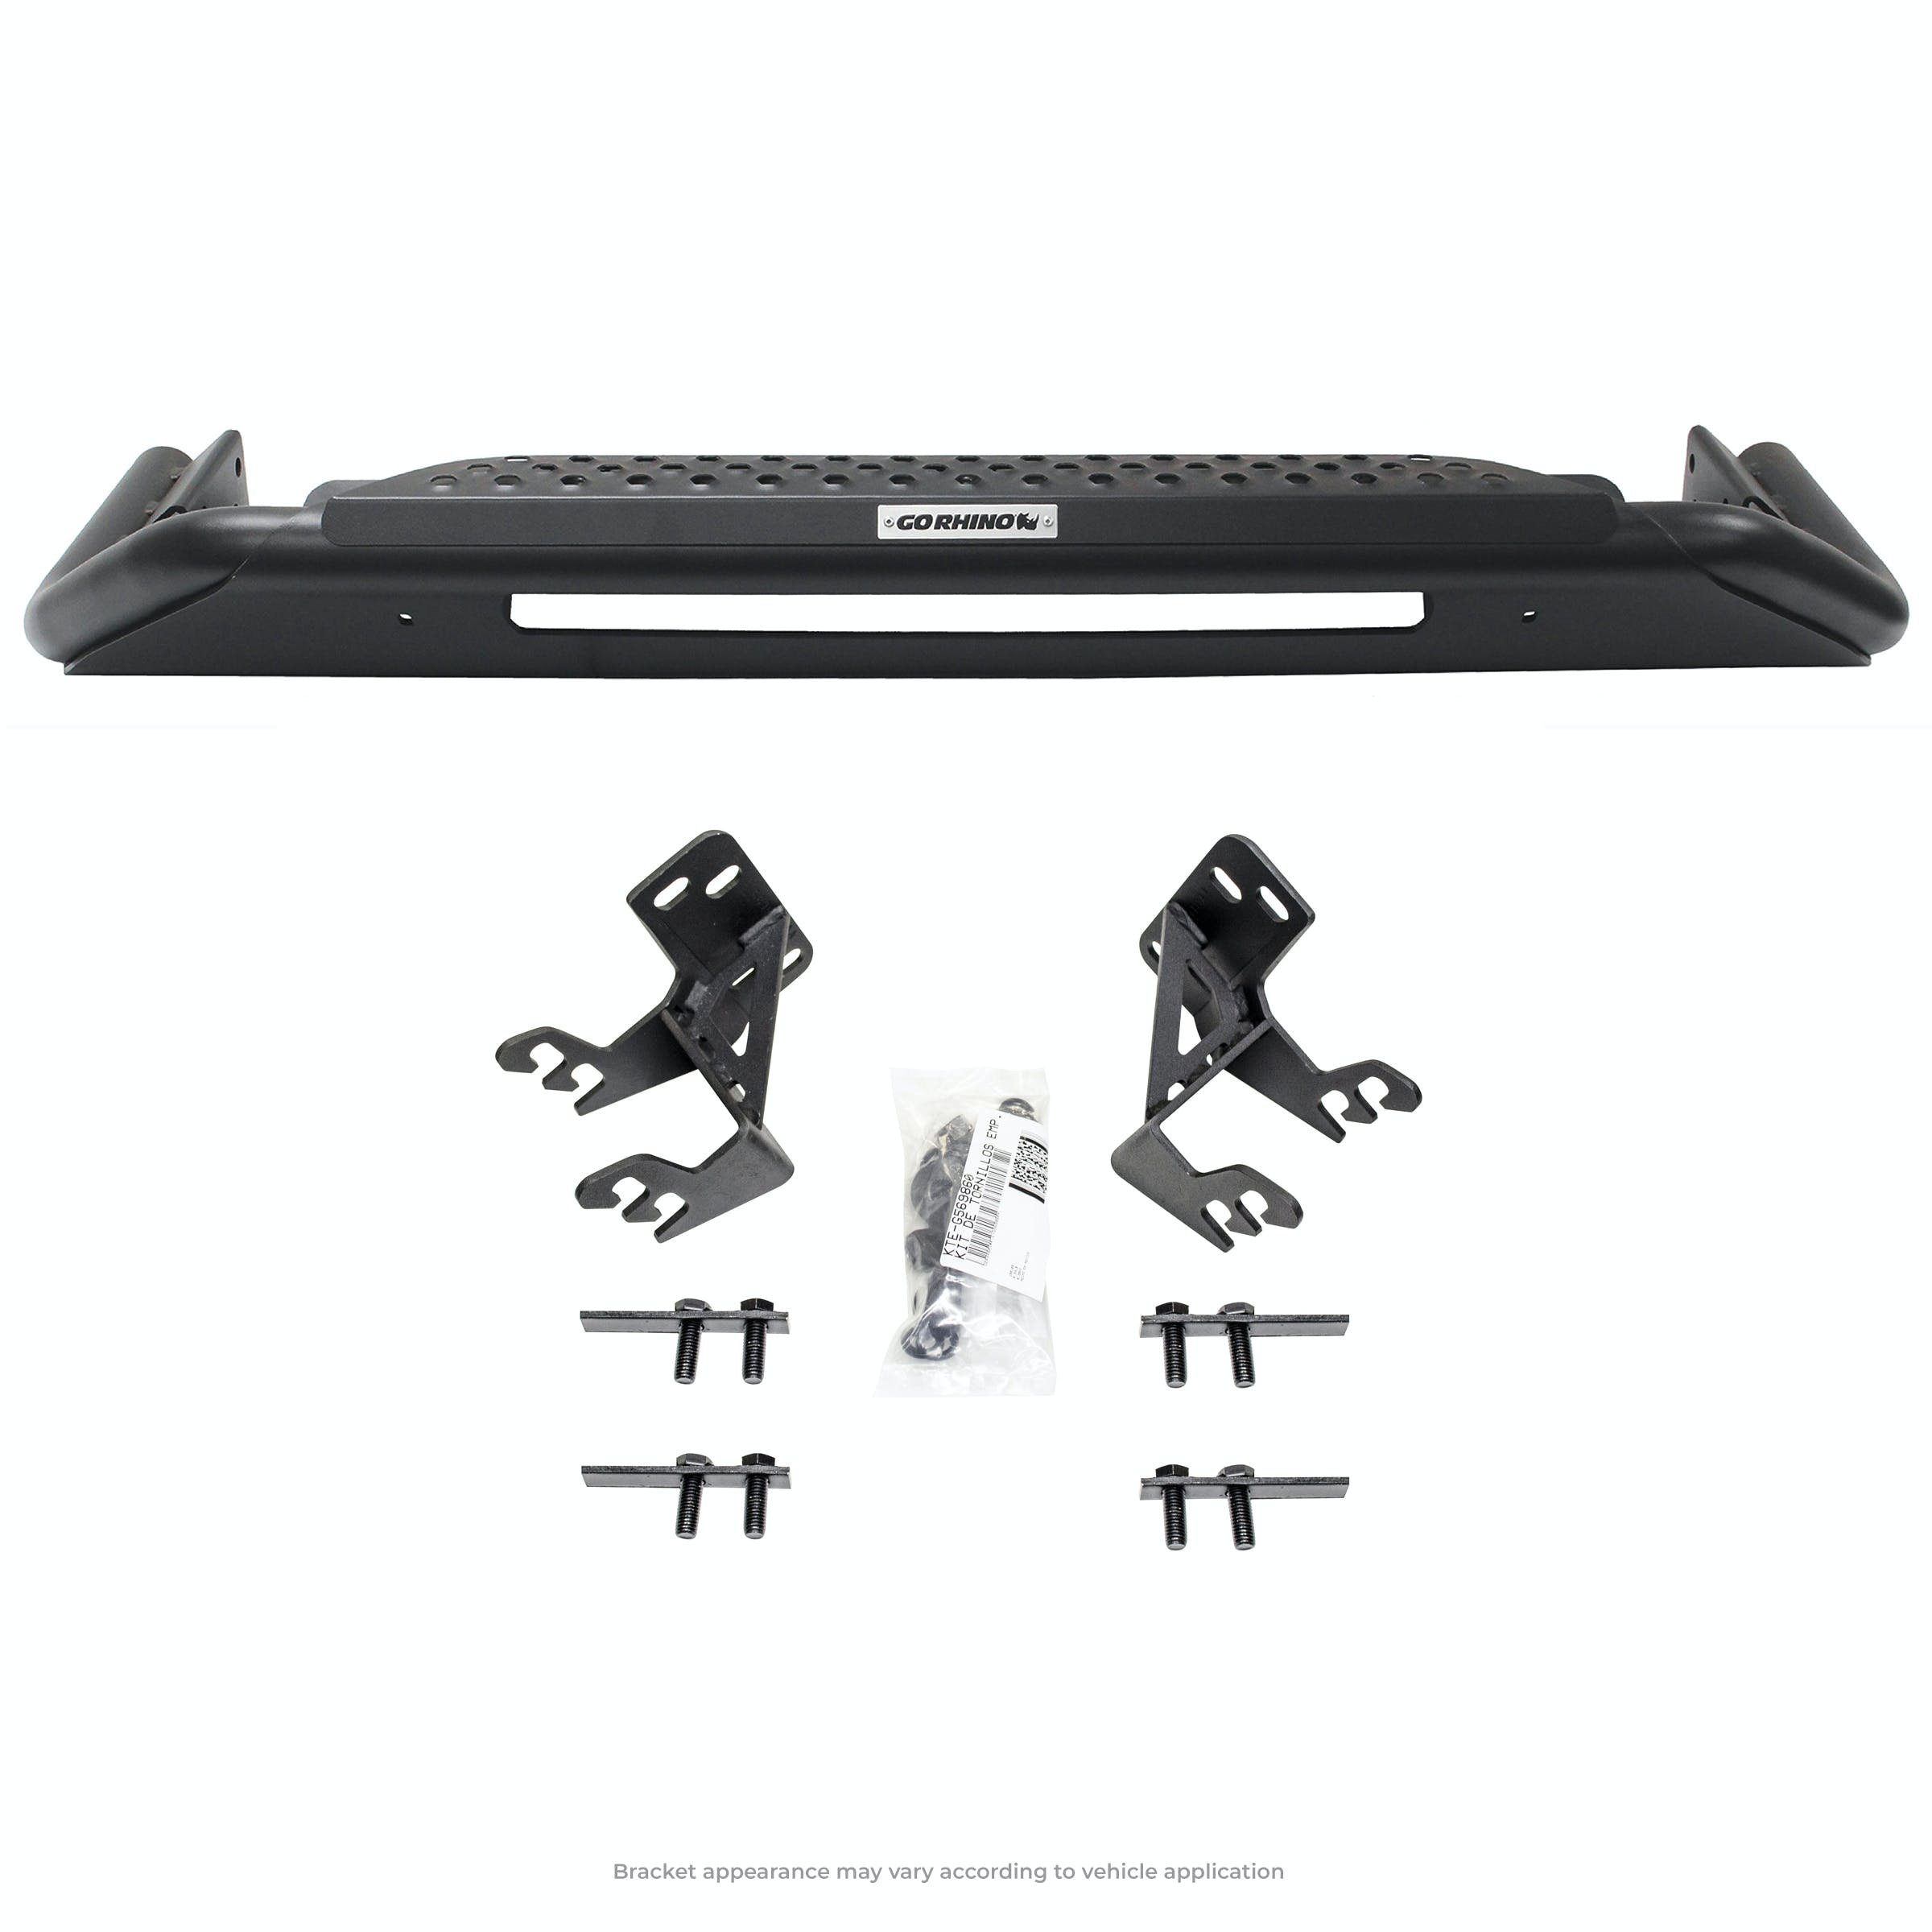 Go Rhino 562260T RC3 LR - Complete kit: Front guard + Brackets